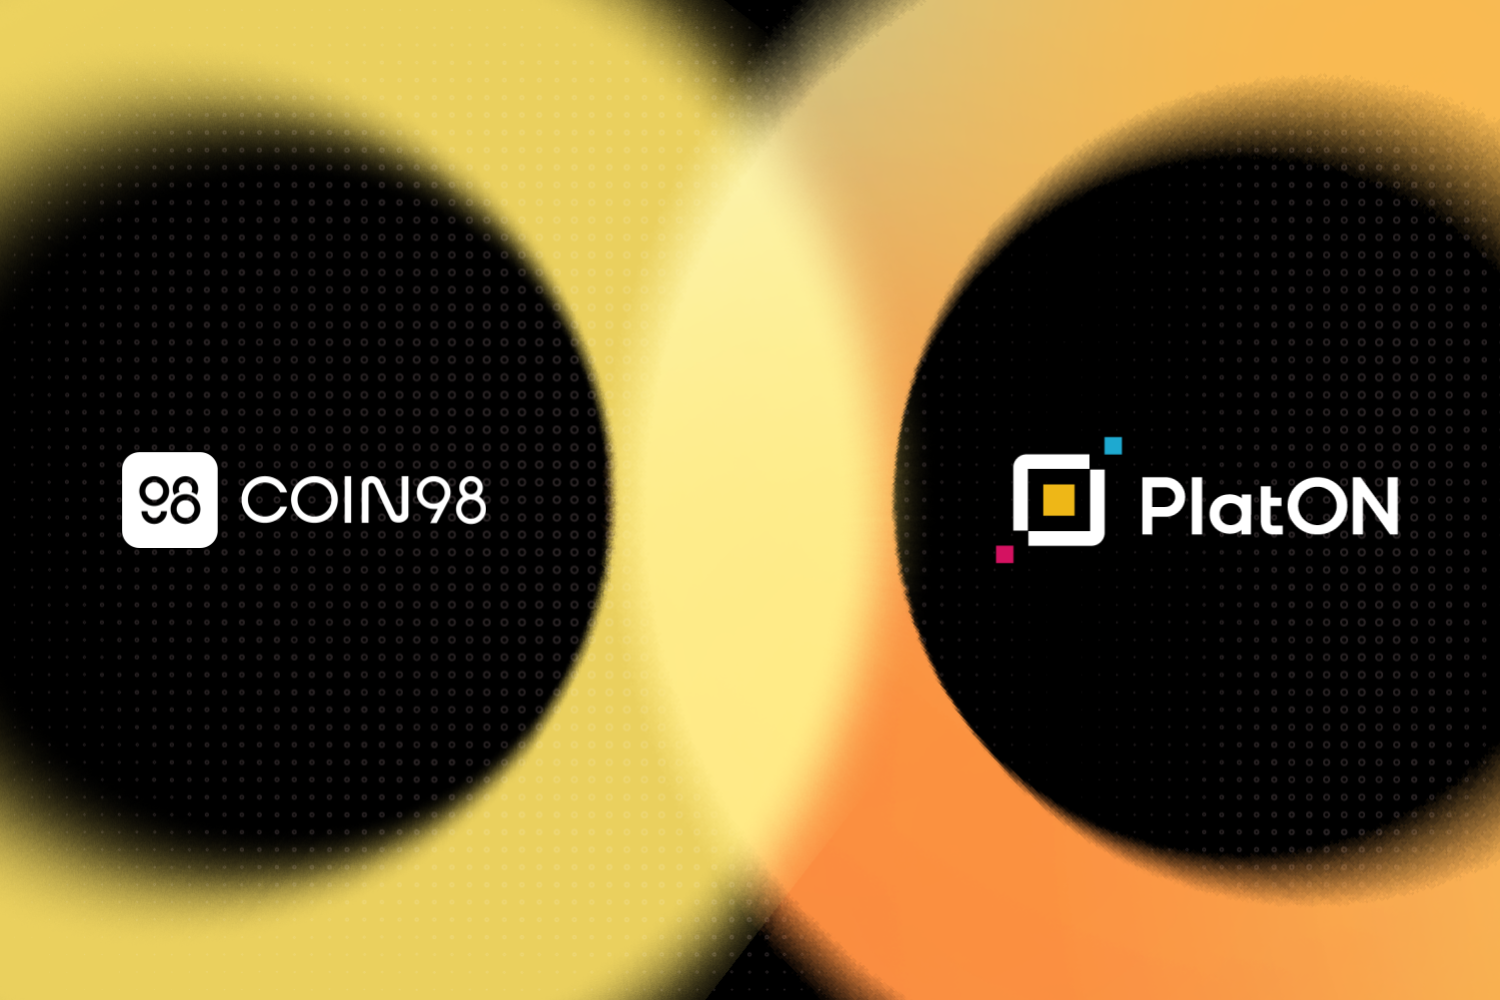 Coin98 now integrates PlatON, fostering private data security for Web3